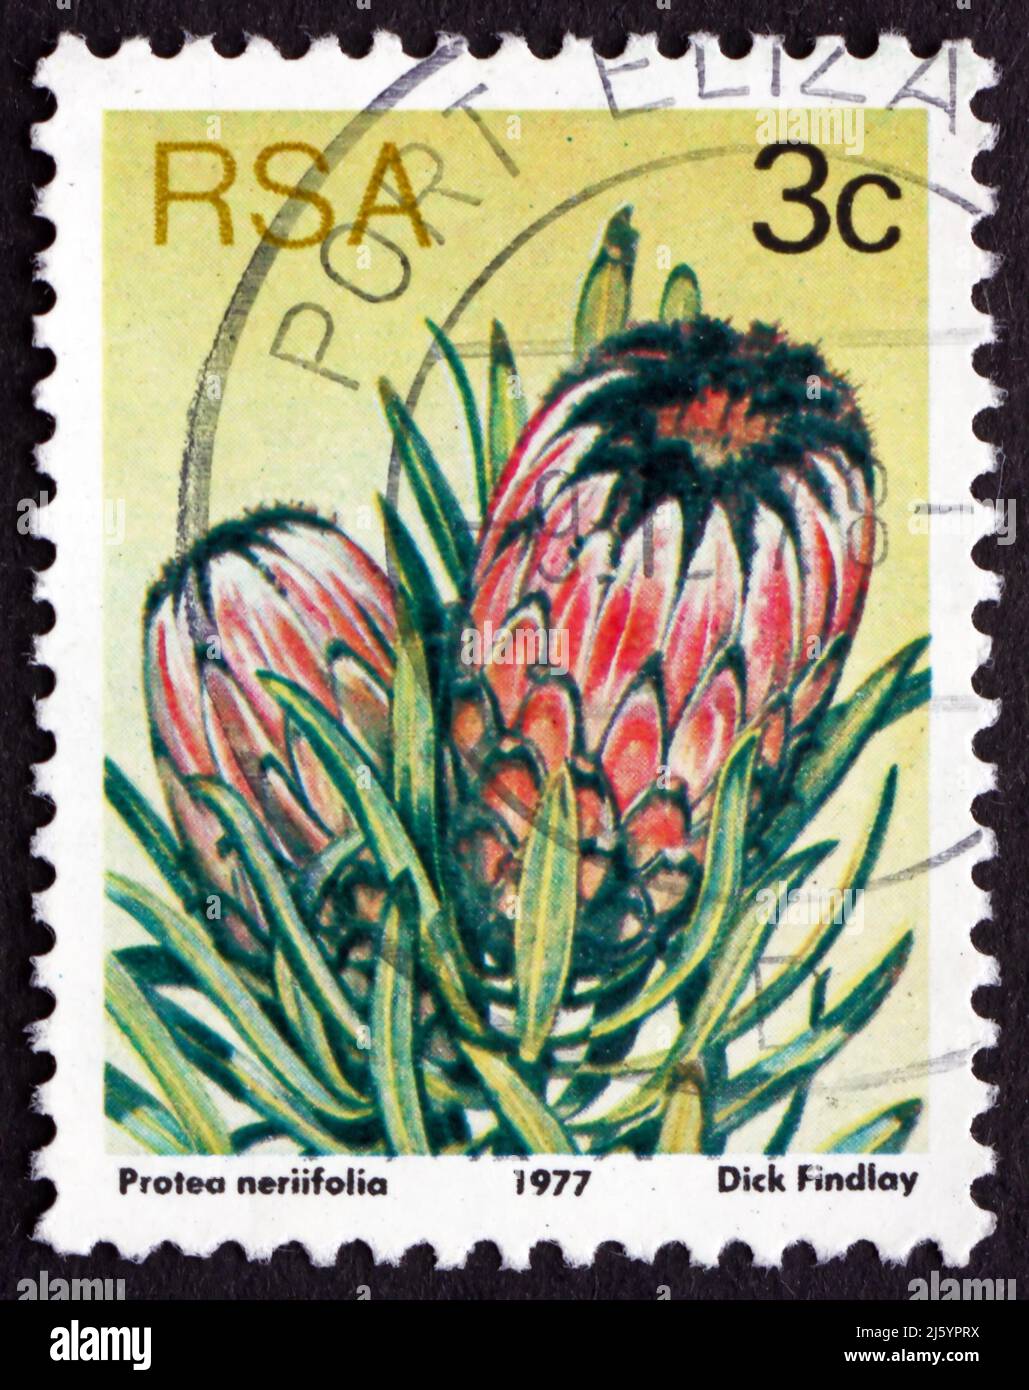 SOUTH AFRICA - CIRCA 1977: a stamp printed in South Africa shows Oleanderleaf Protea, Protea Neriifolia, Flowering Plant, circa 1977 Stock Photo